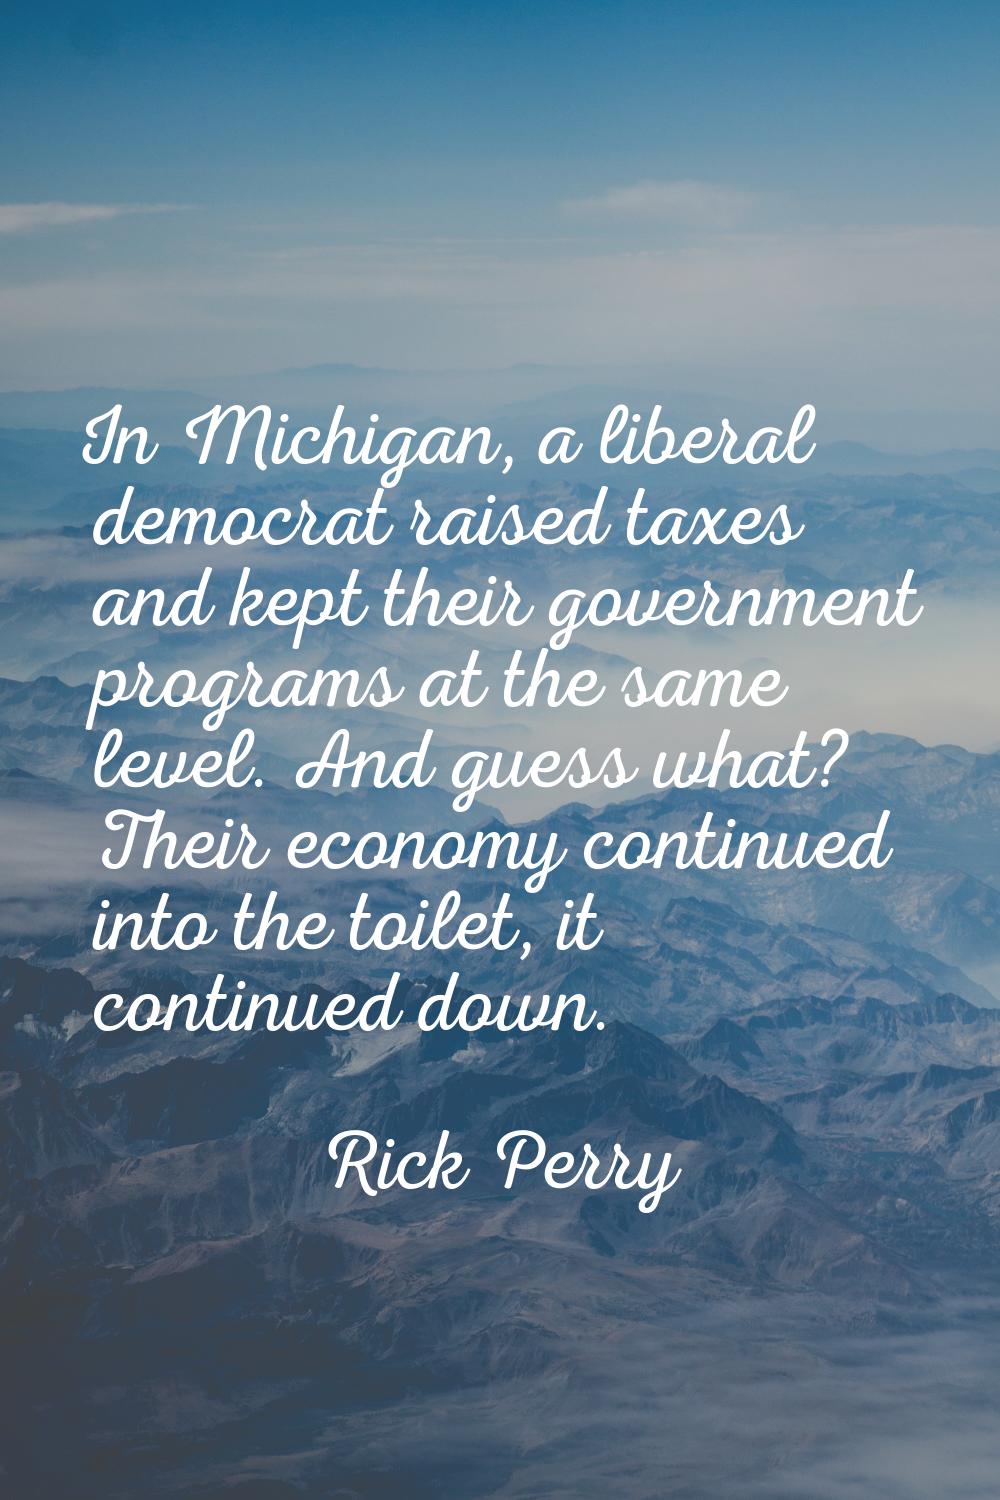 In Michigan, a liberal democrat raised taxes and kept their government programs at the same level. 